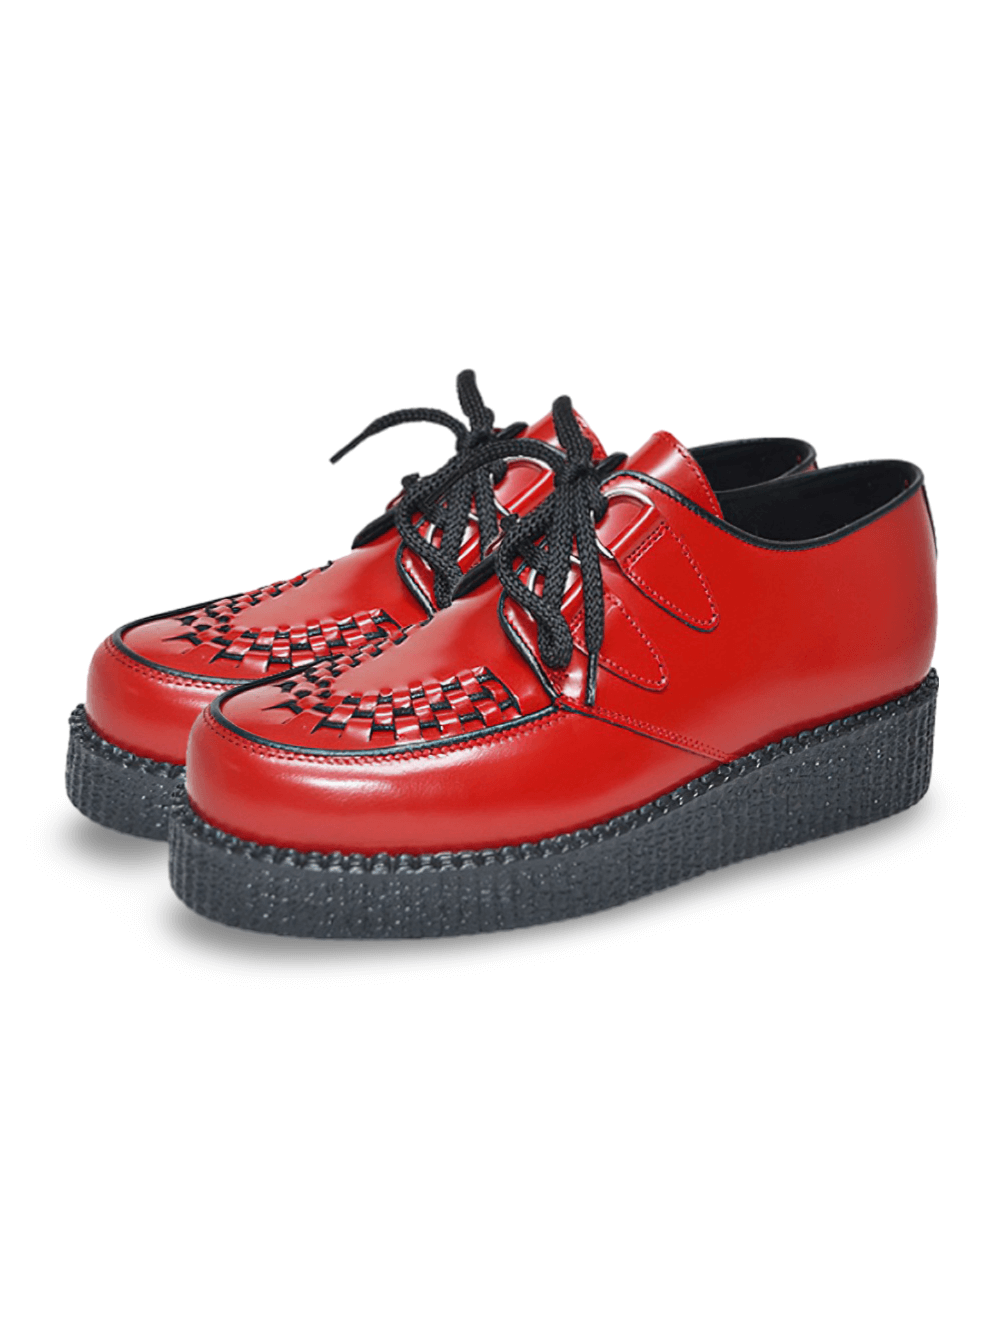 Unisex Box Leather Creepers with Round Toe Design